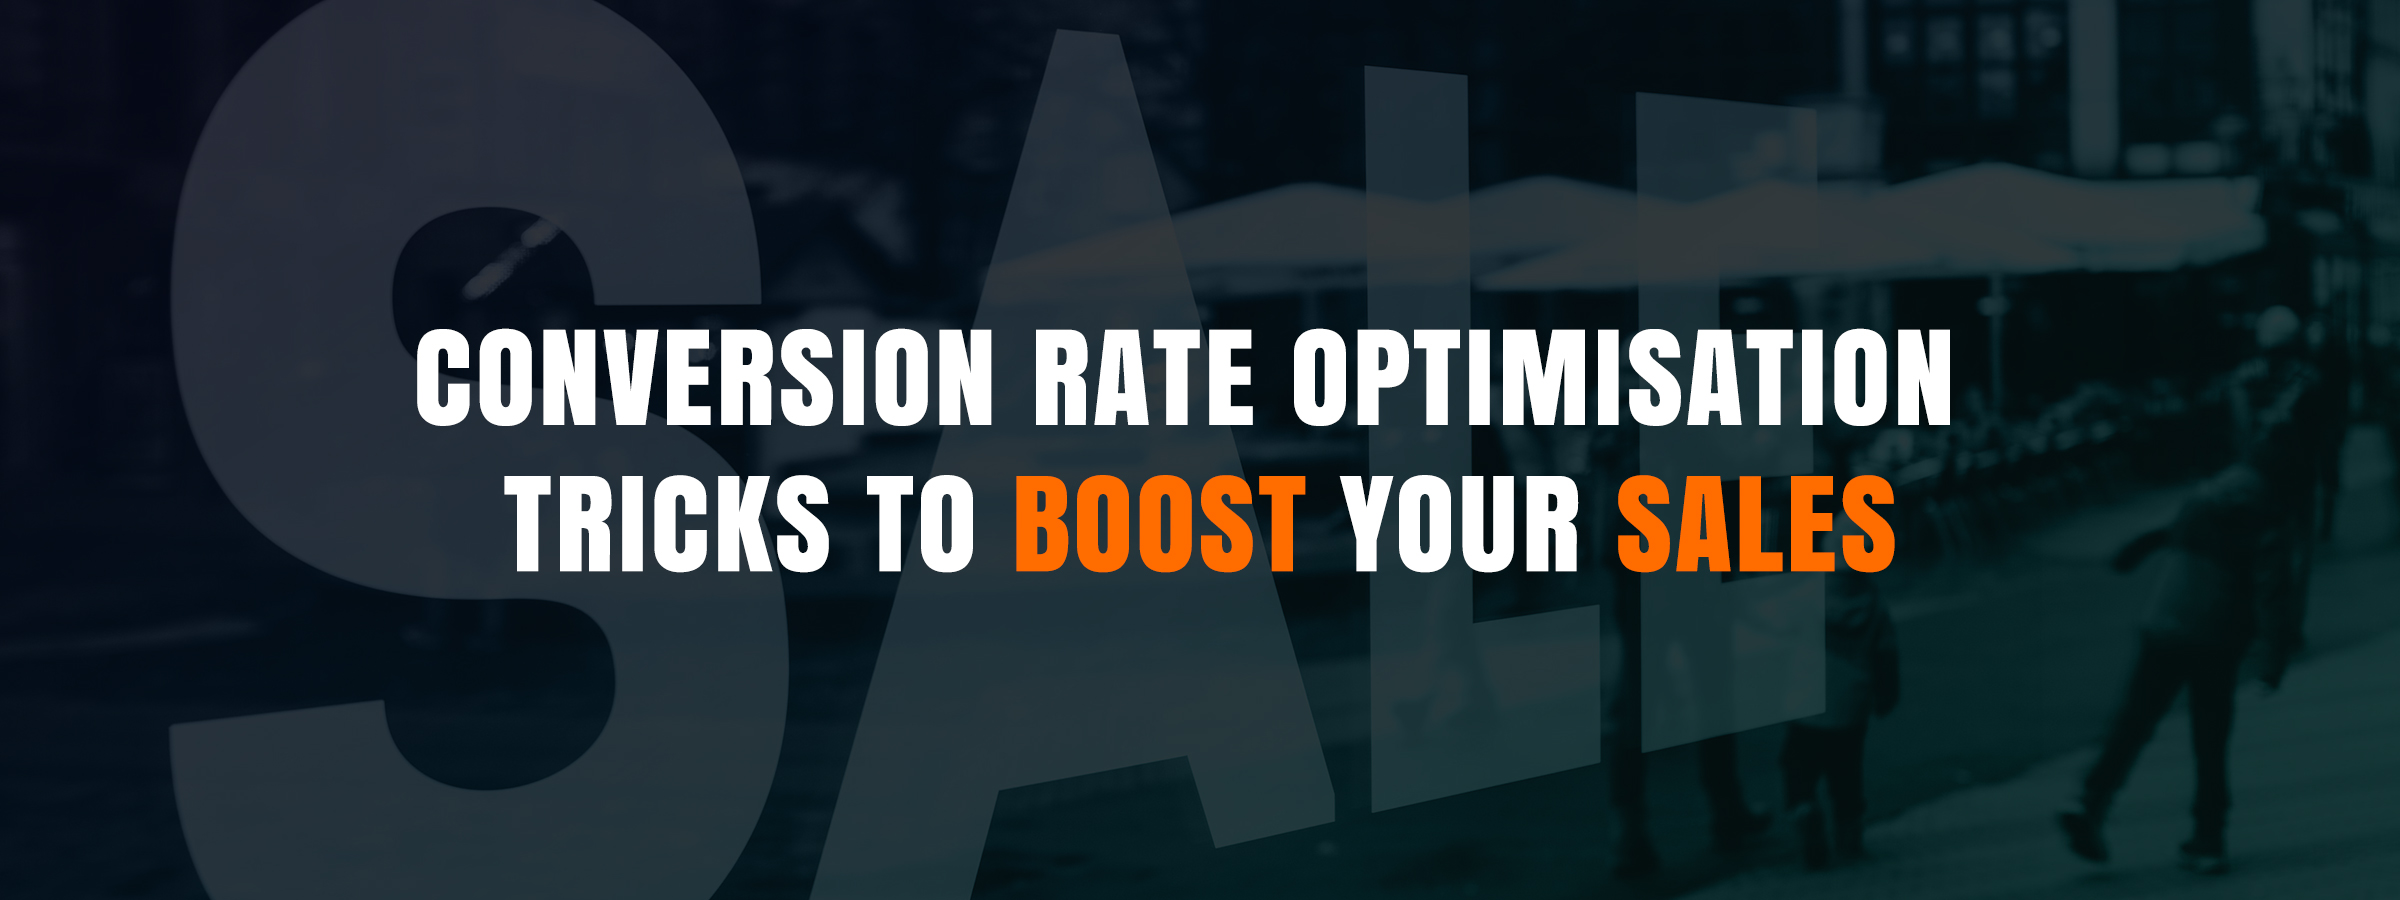 Conversion Rate Optimization Tricks To Boost Your Sales